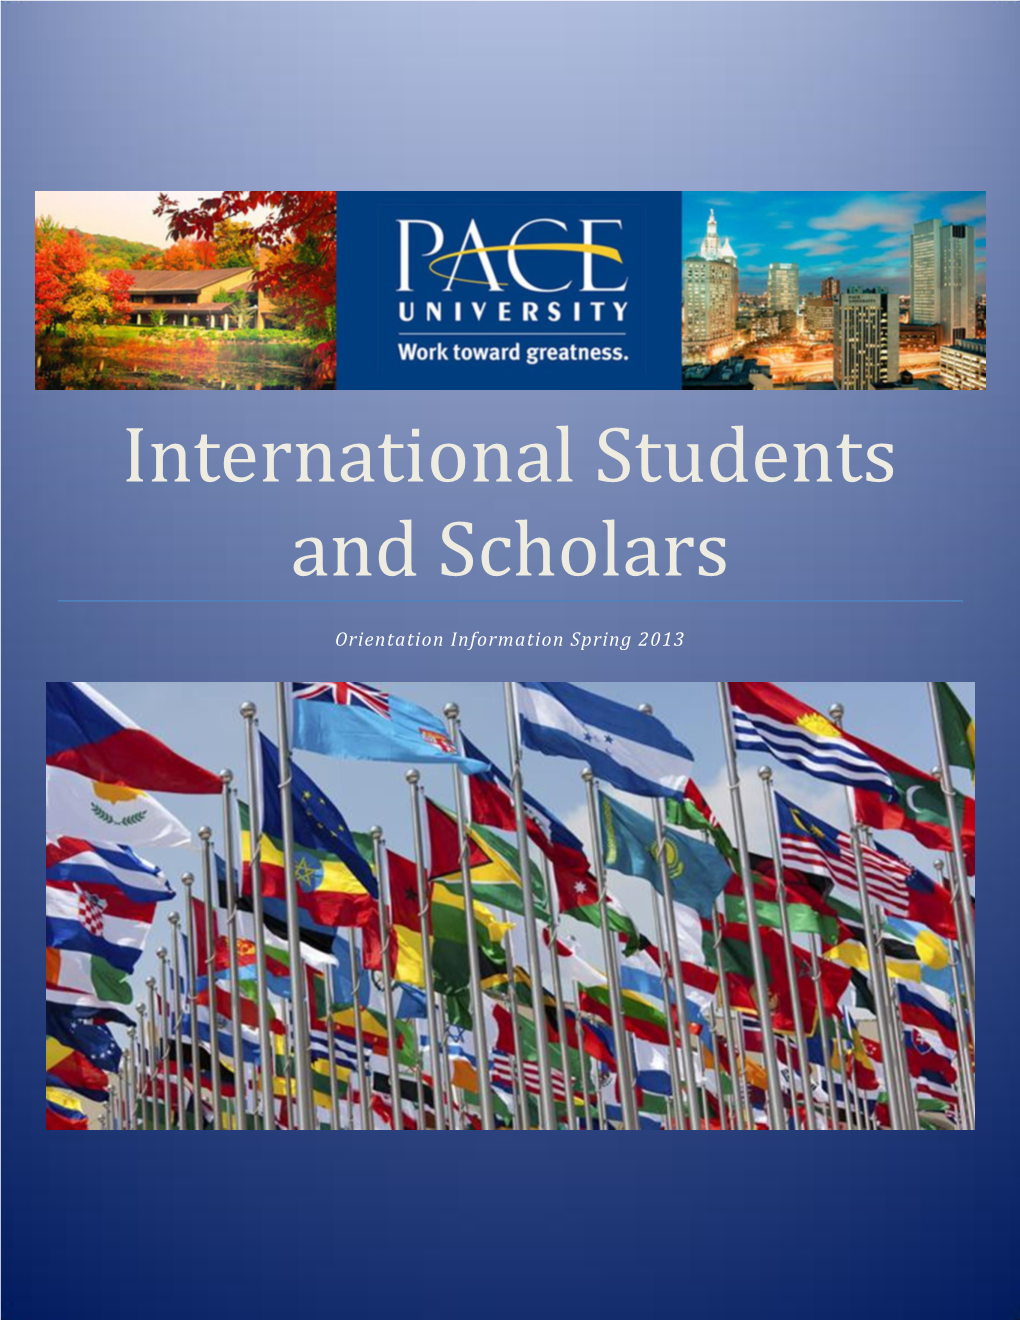 International Students and Scholars Office Services 2